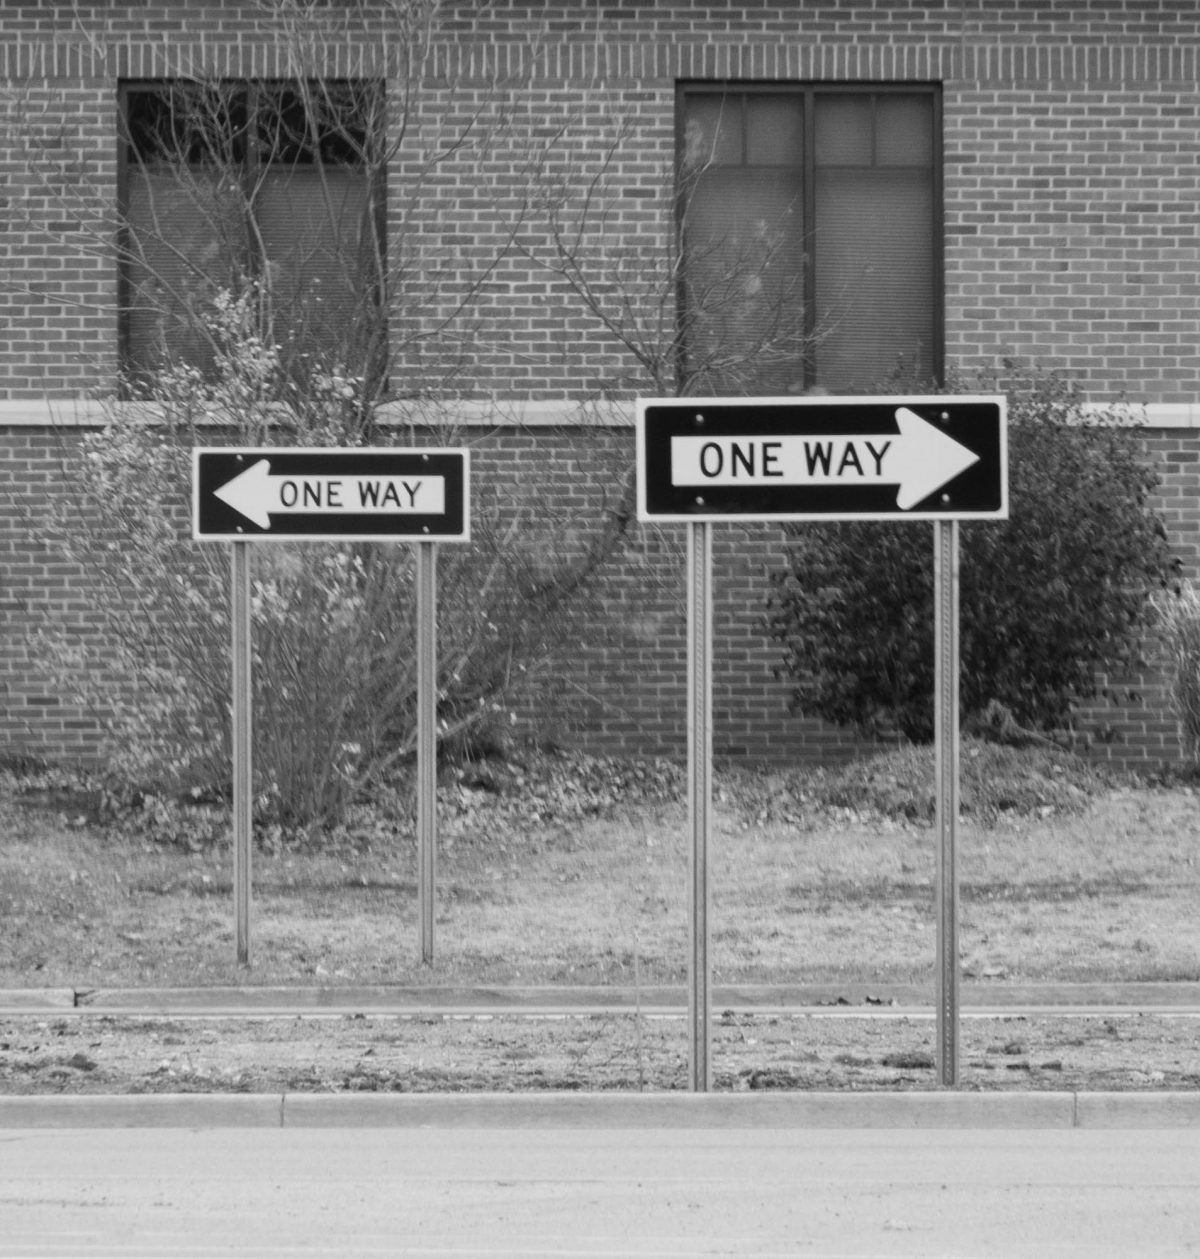 Two one-way signs pointing in opposite directions.